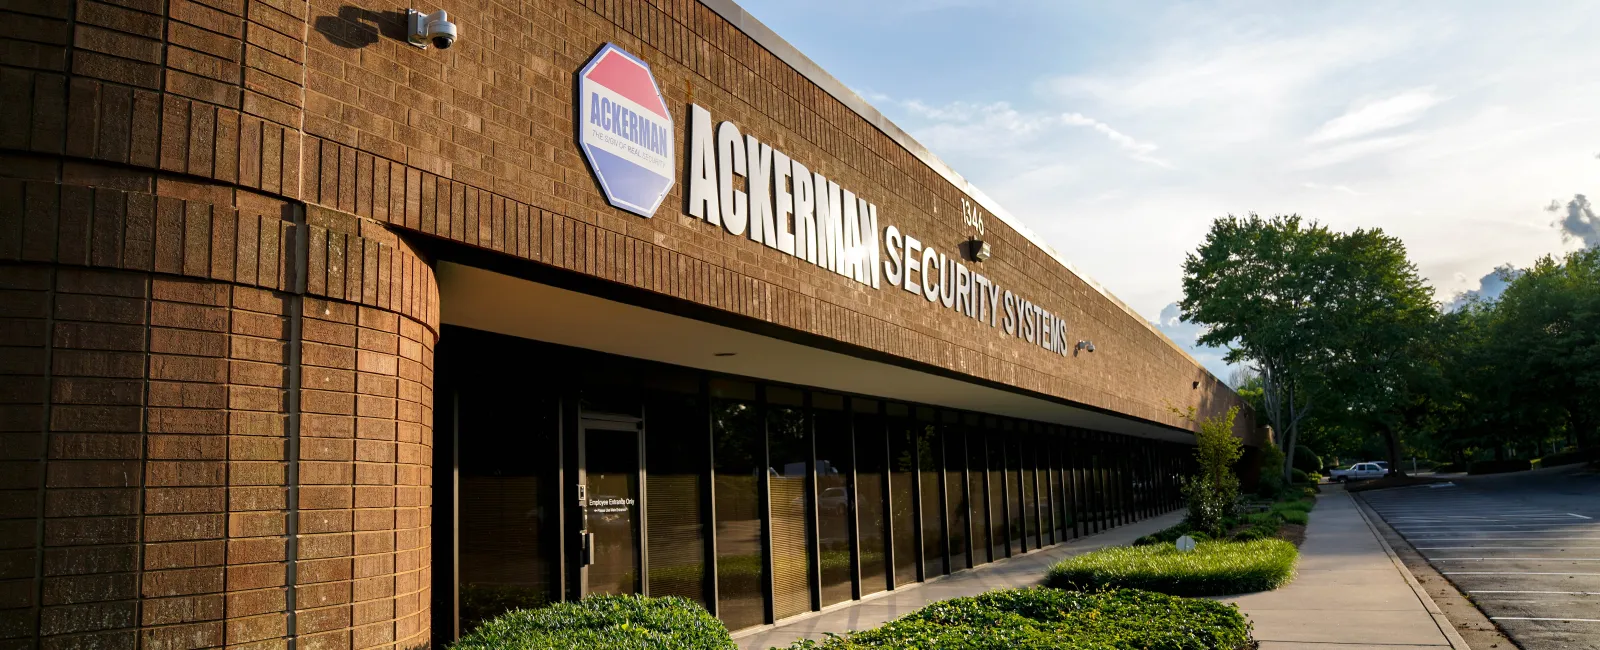 Ackerman Named One of Top Security Companies in 2018